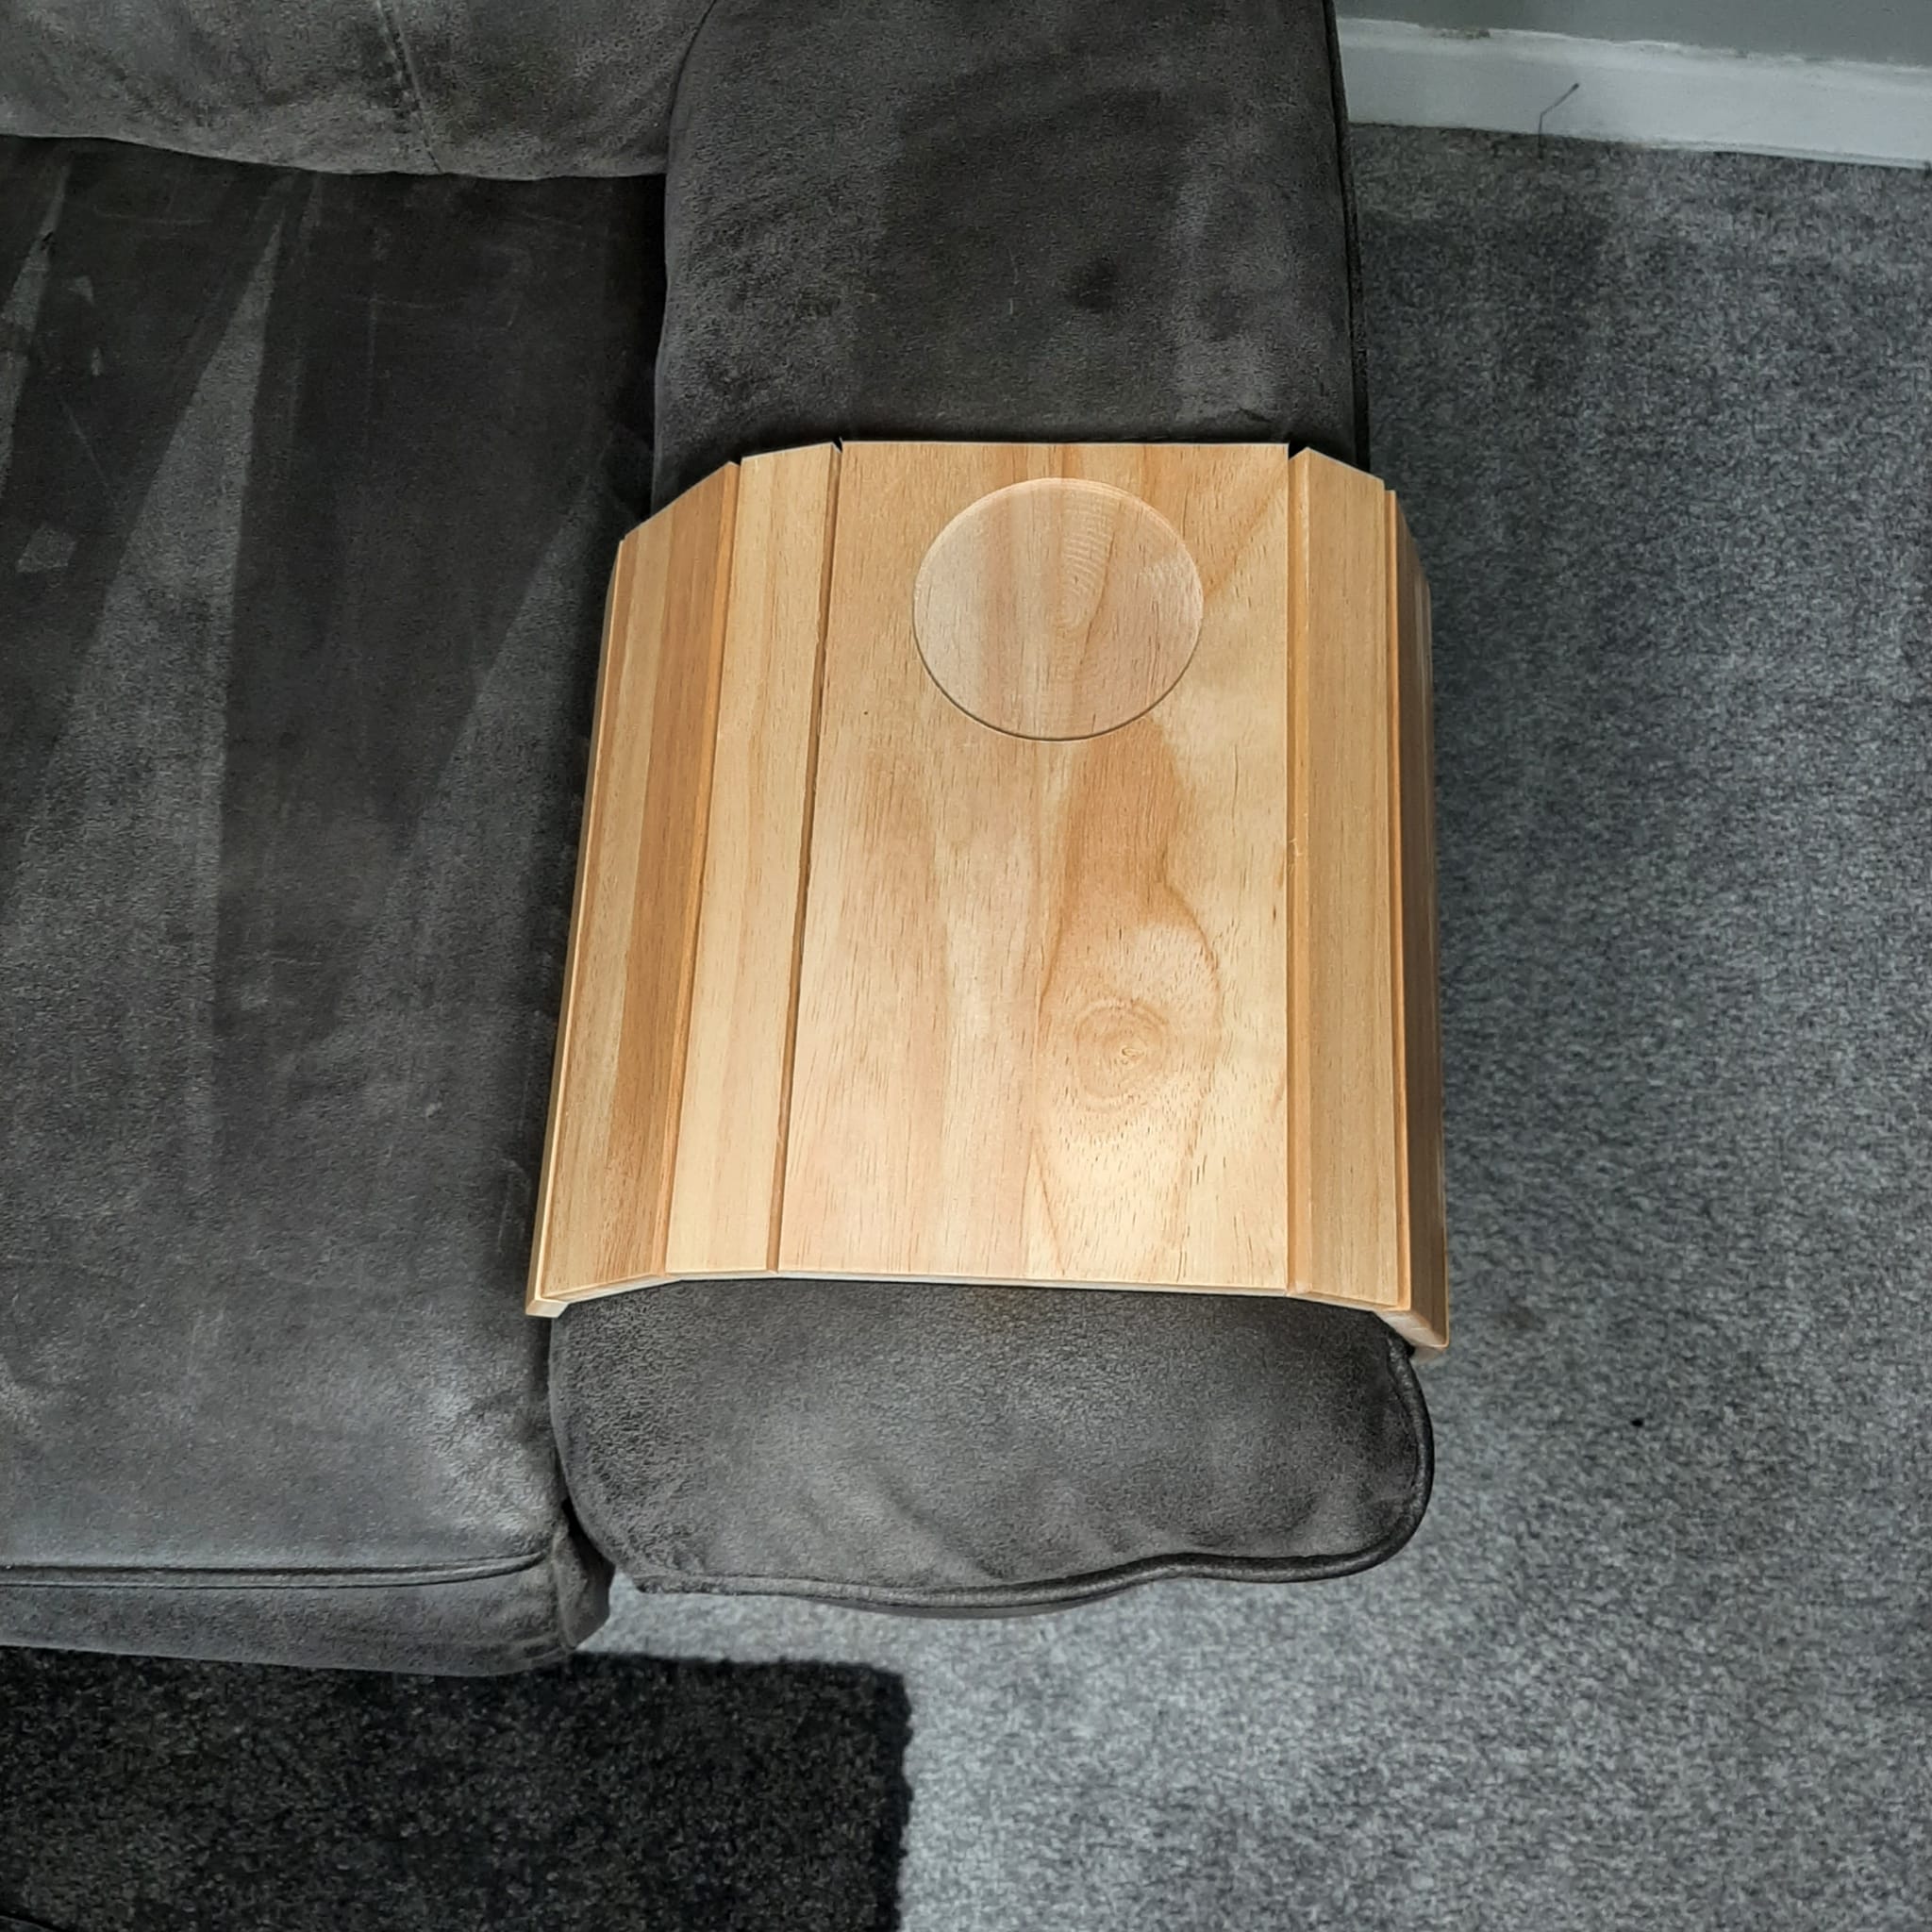 wooden sofa arm tray - blank view from above showing area to personalise and drink recess